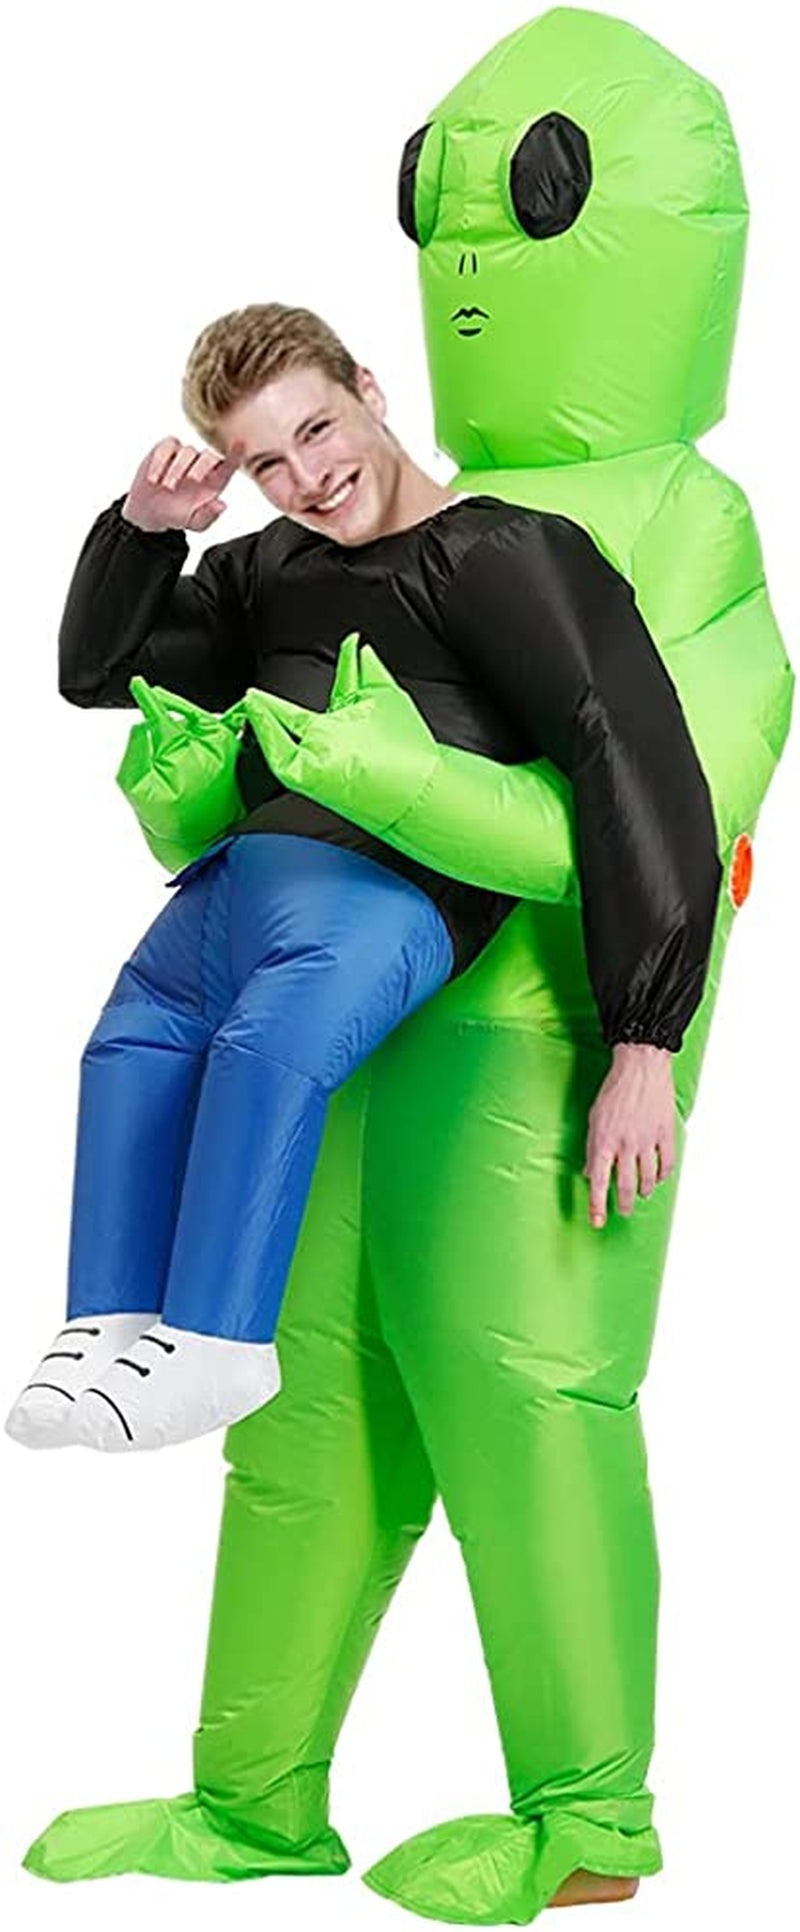 Poptrend Inflatable Alien Costume Inflatable Halloween Costumes Blow up Alien Costume for Halloween, Easter,Christmas…